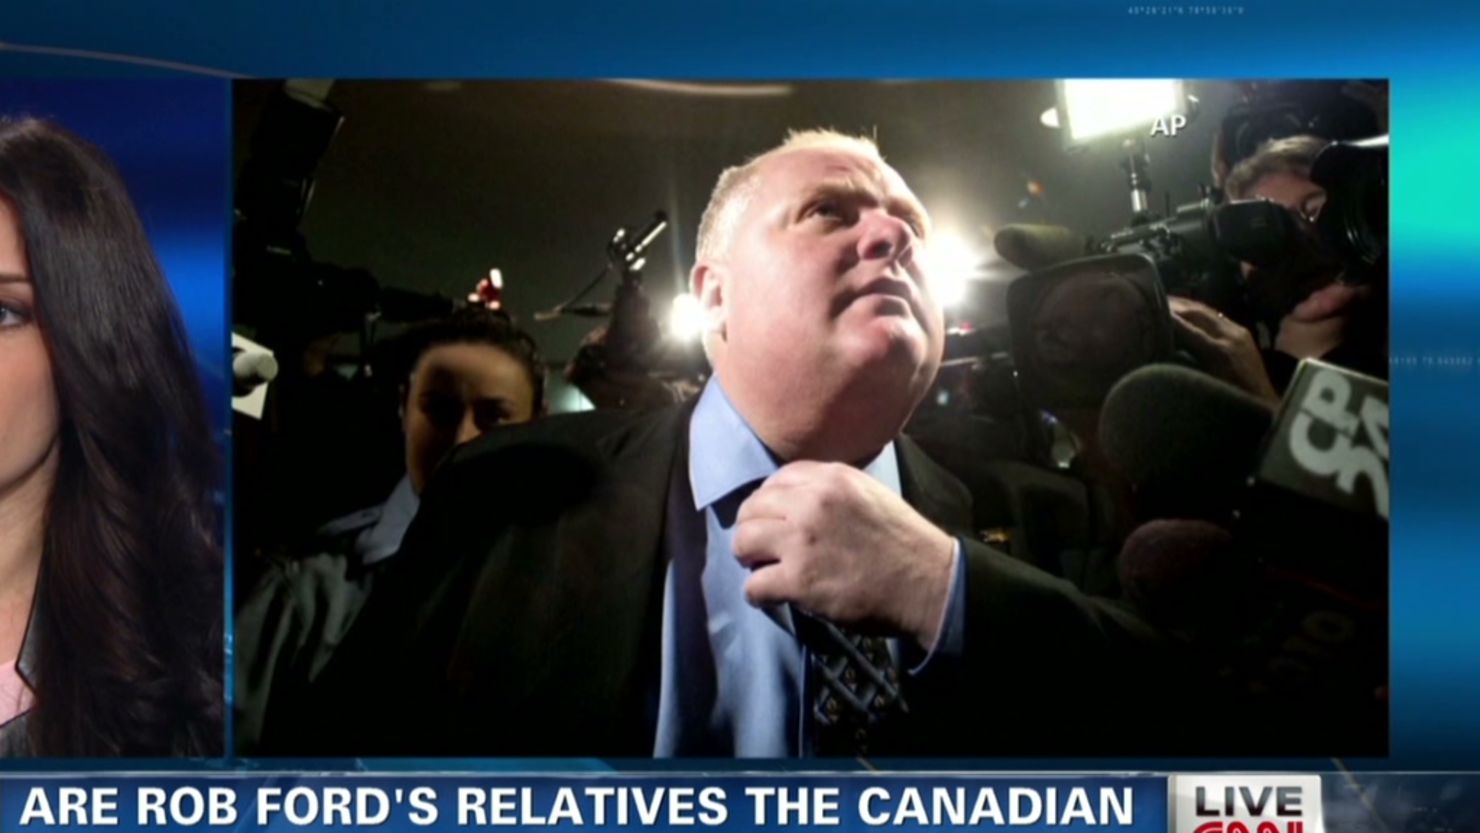 "We are Hollywood North," said Toronto Mayor Rob Ford, making a surprise appearance at the Oscars.